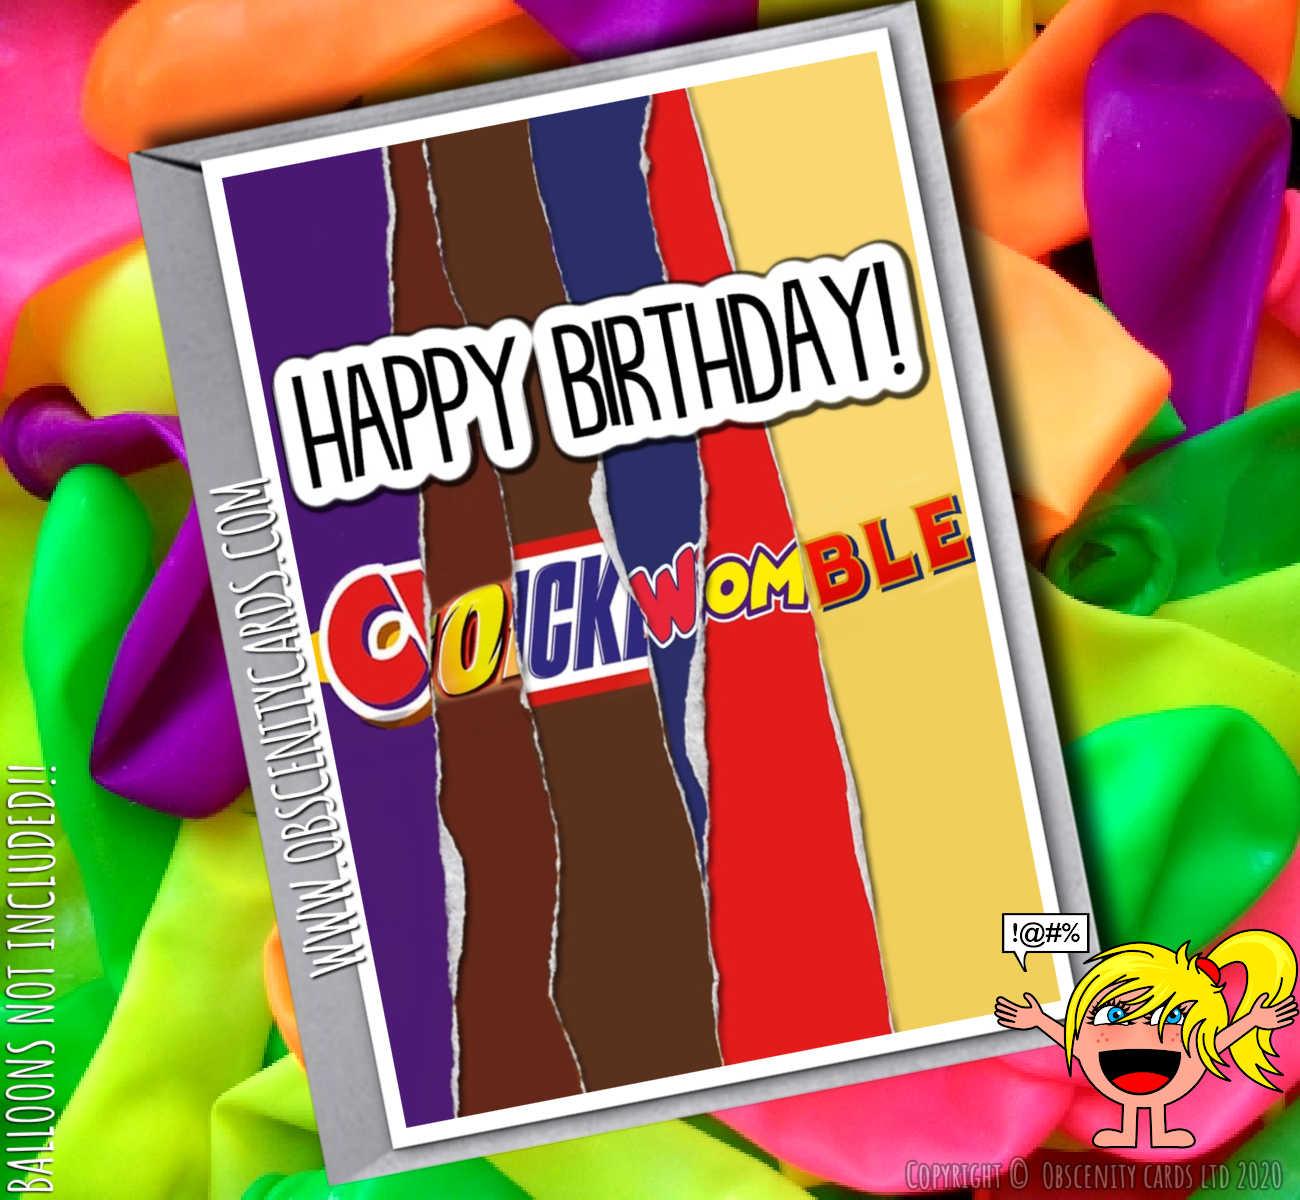 HAPPY BIRTHDAY COCK WOMBLE CHOCOLATE WRAPPER FUNNY BIRTHDAY CARD